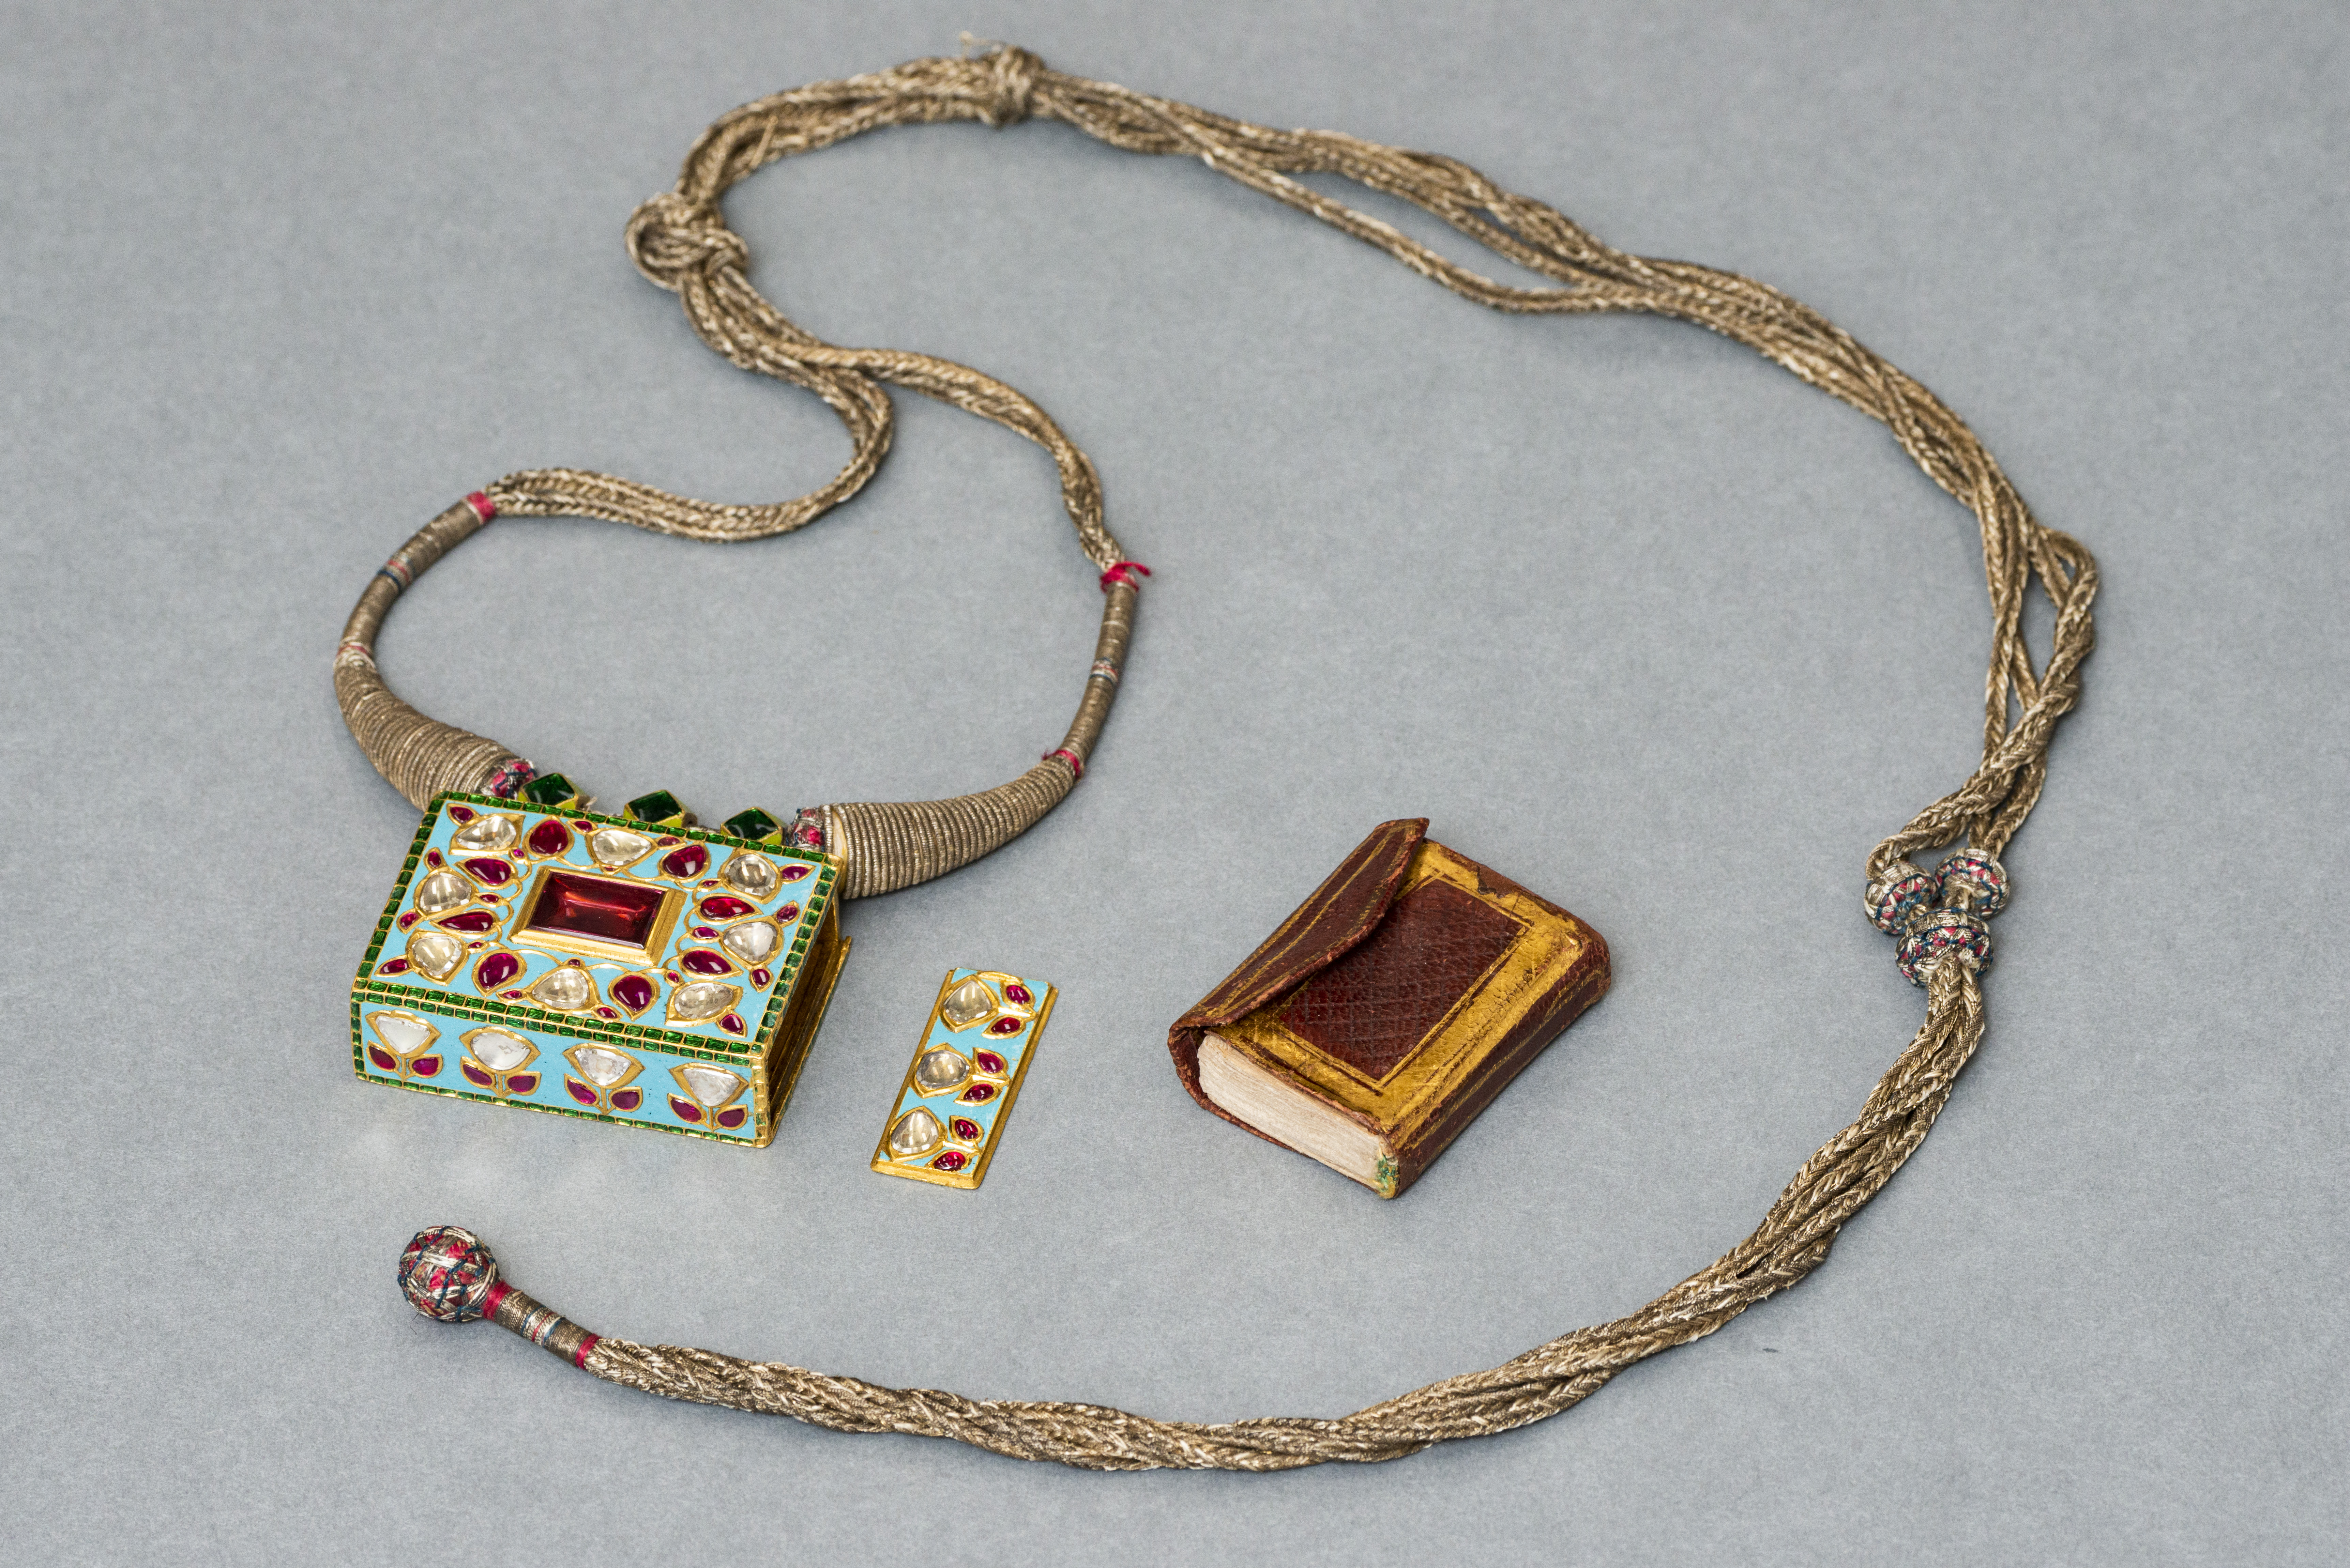 Jewelled necklace with amulet Quran